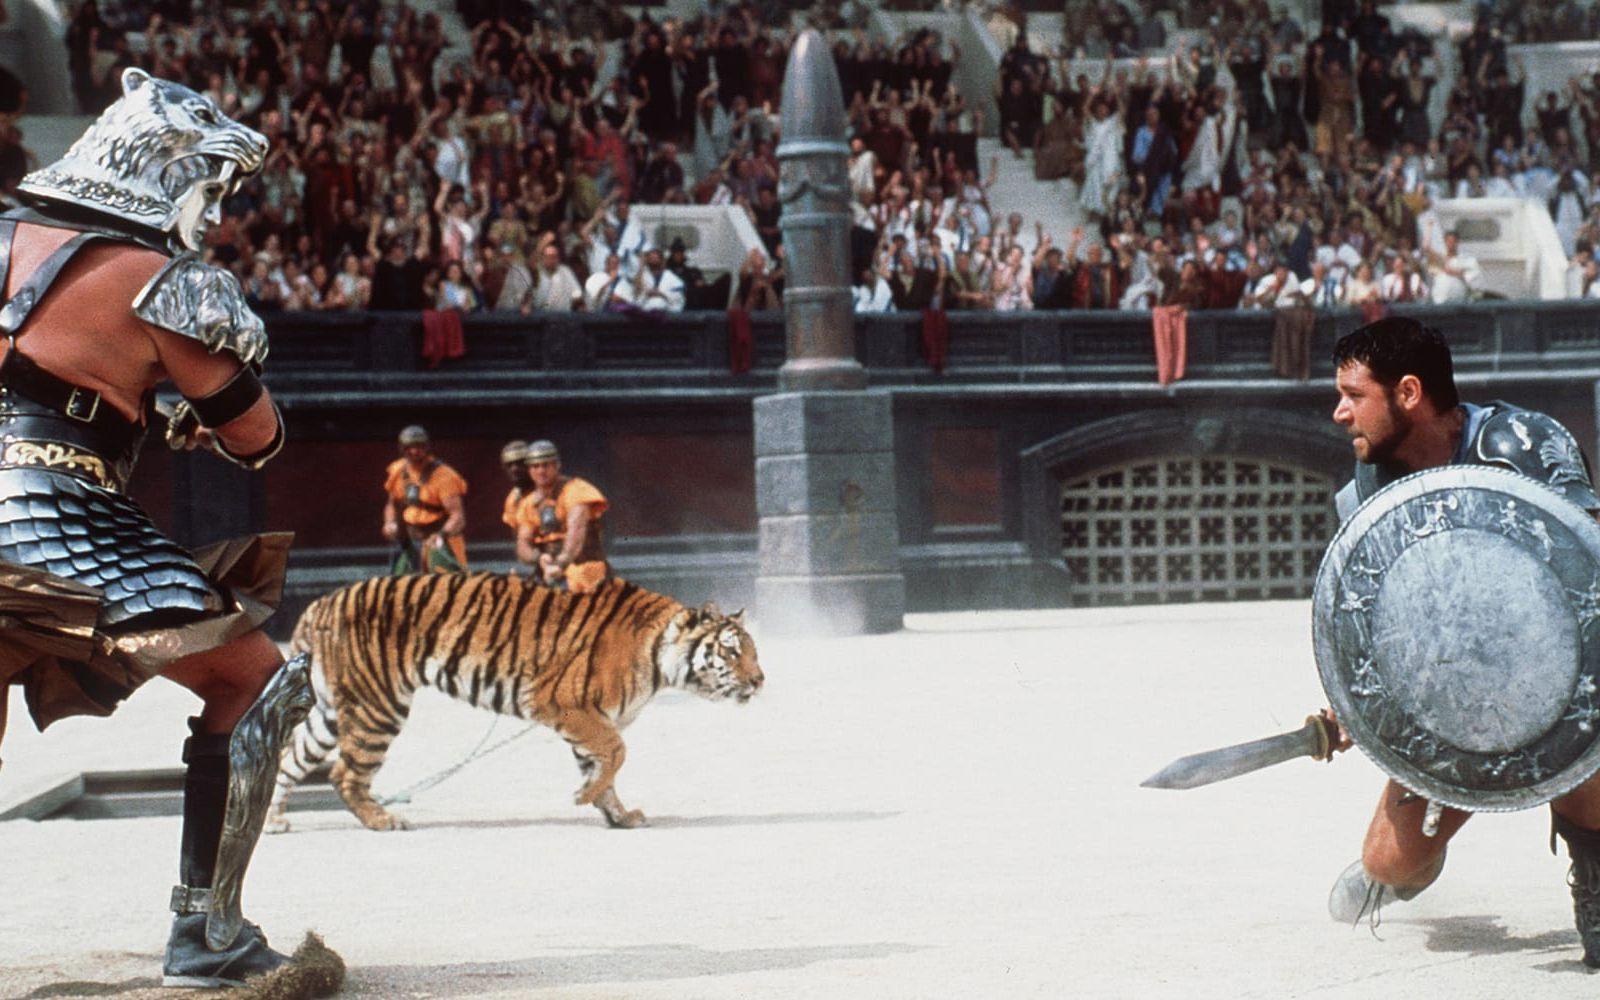 "I will have my vengeance, in this life or the next." – Russell Crowe som General Maximus i Gladiator, 2000. Foto: TT